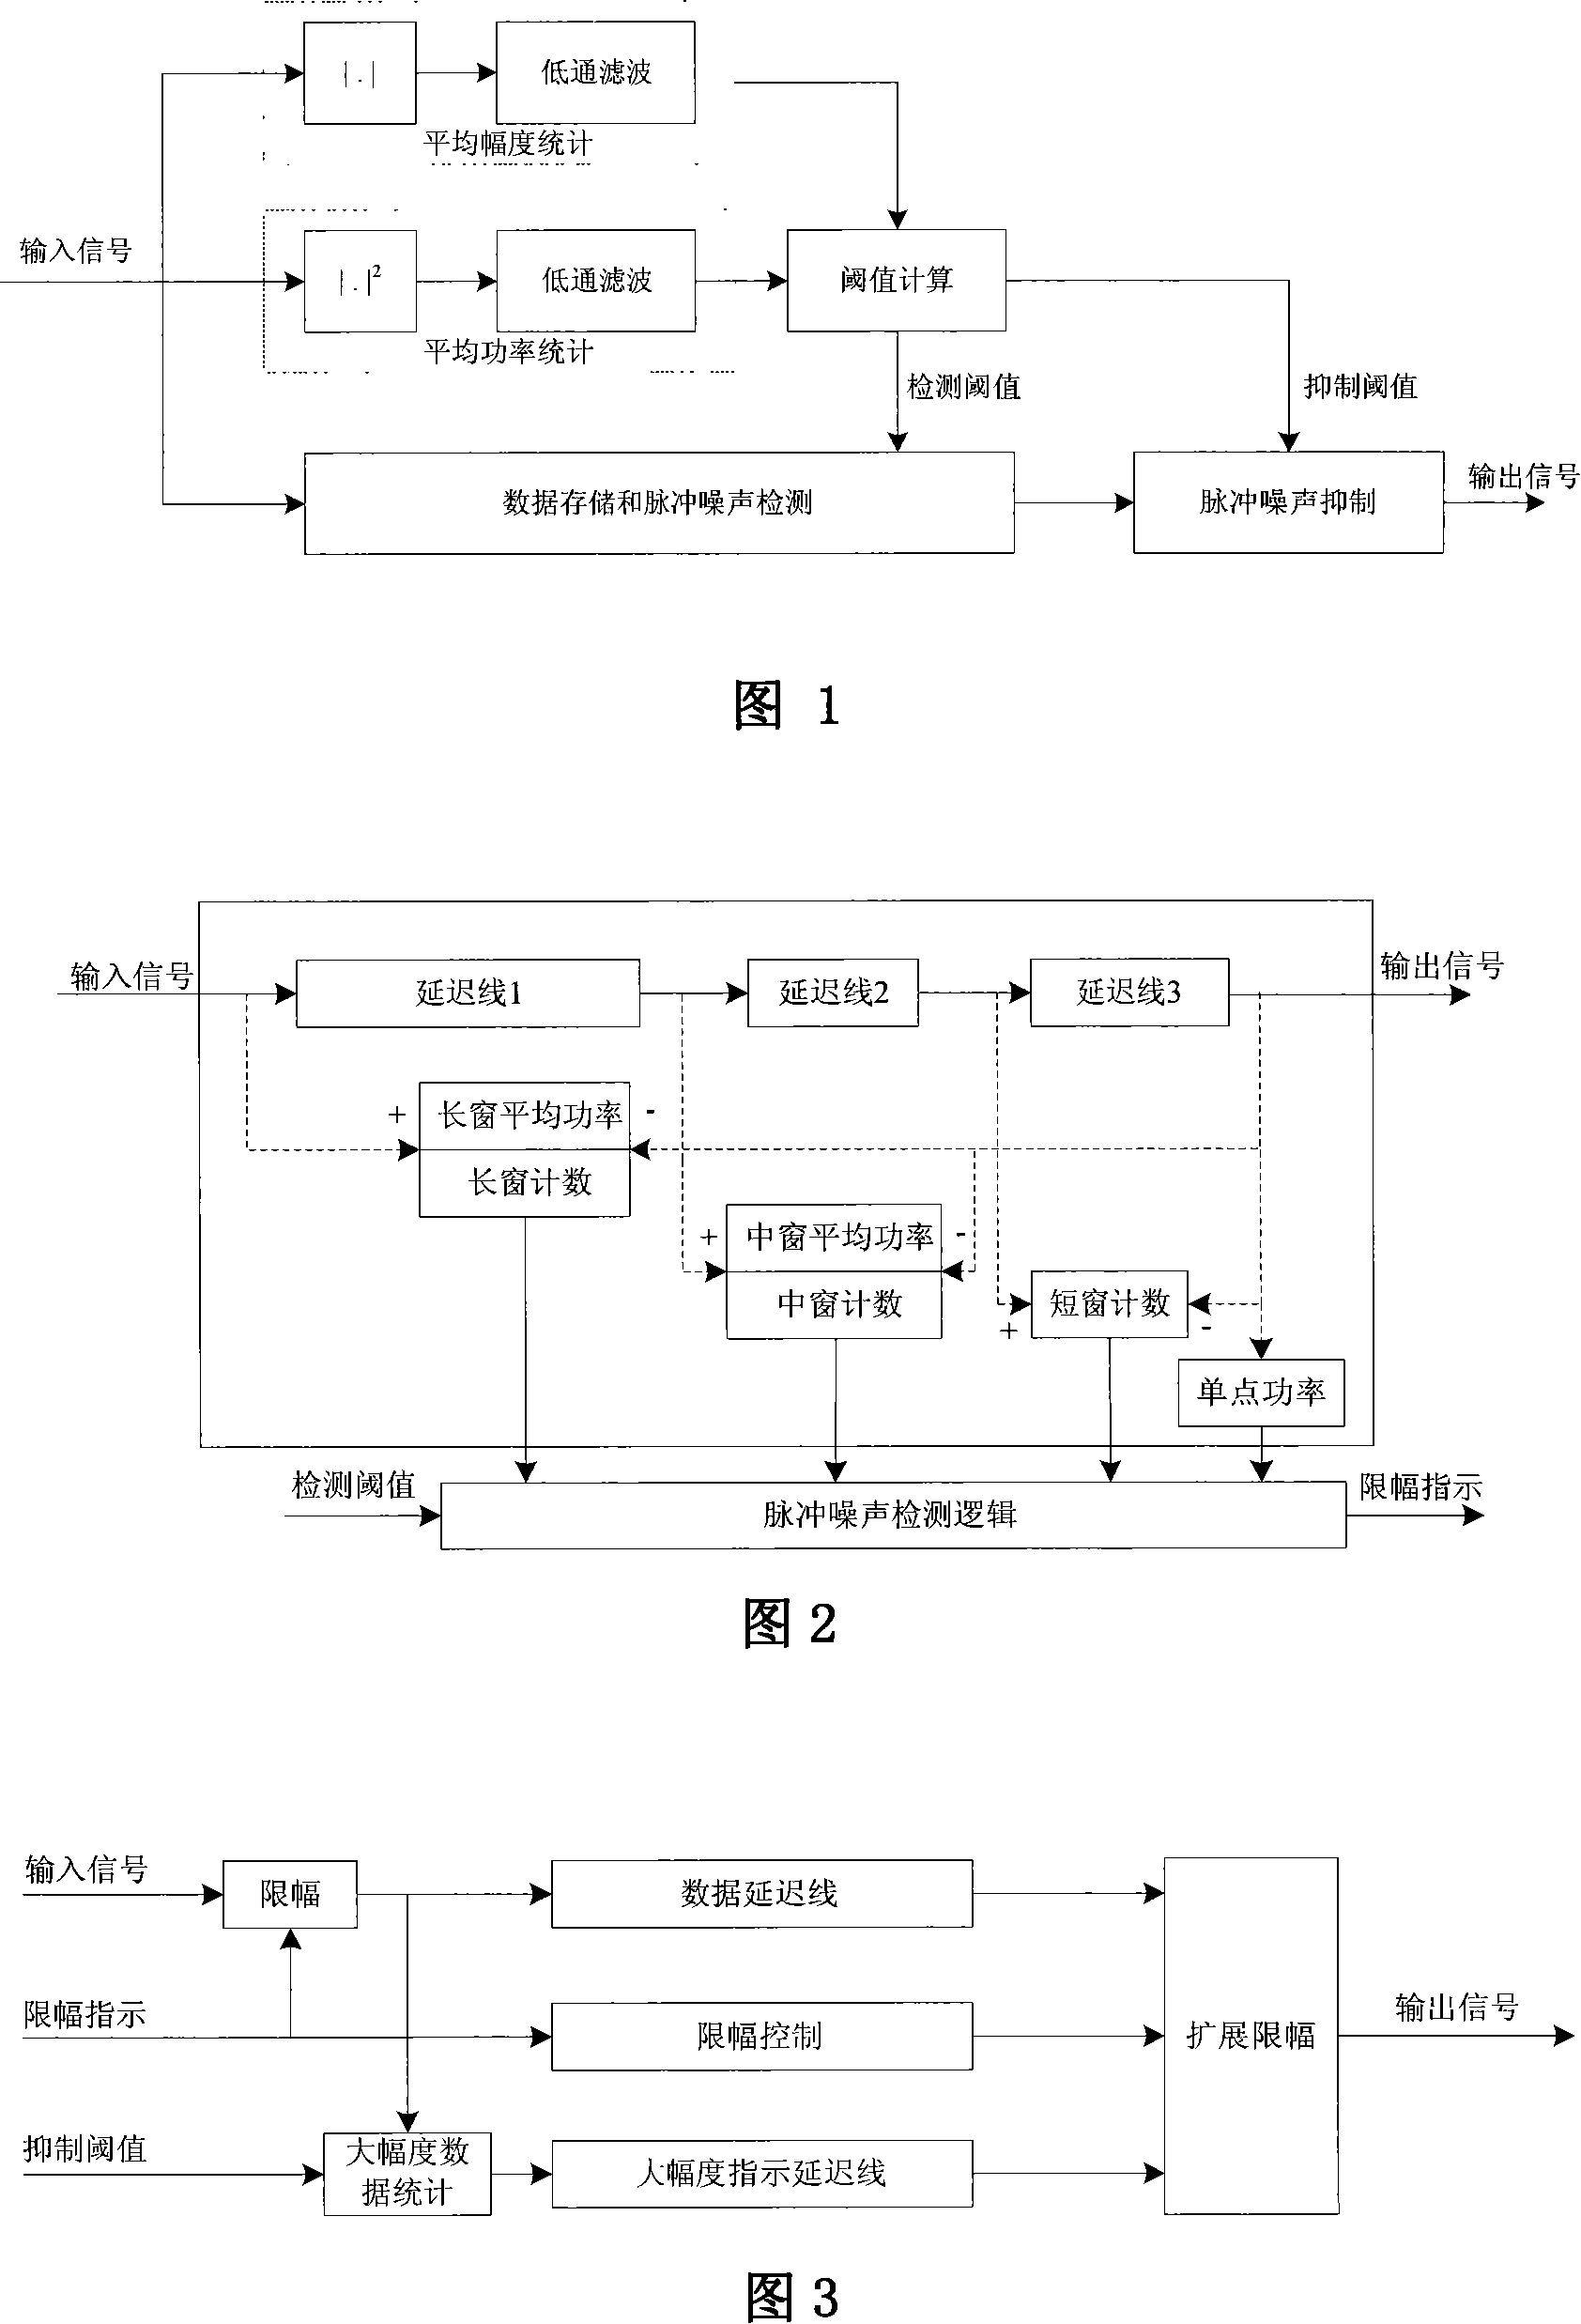 Method of detecting and suppressing pulse noise